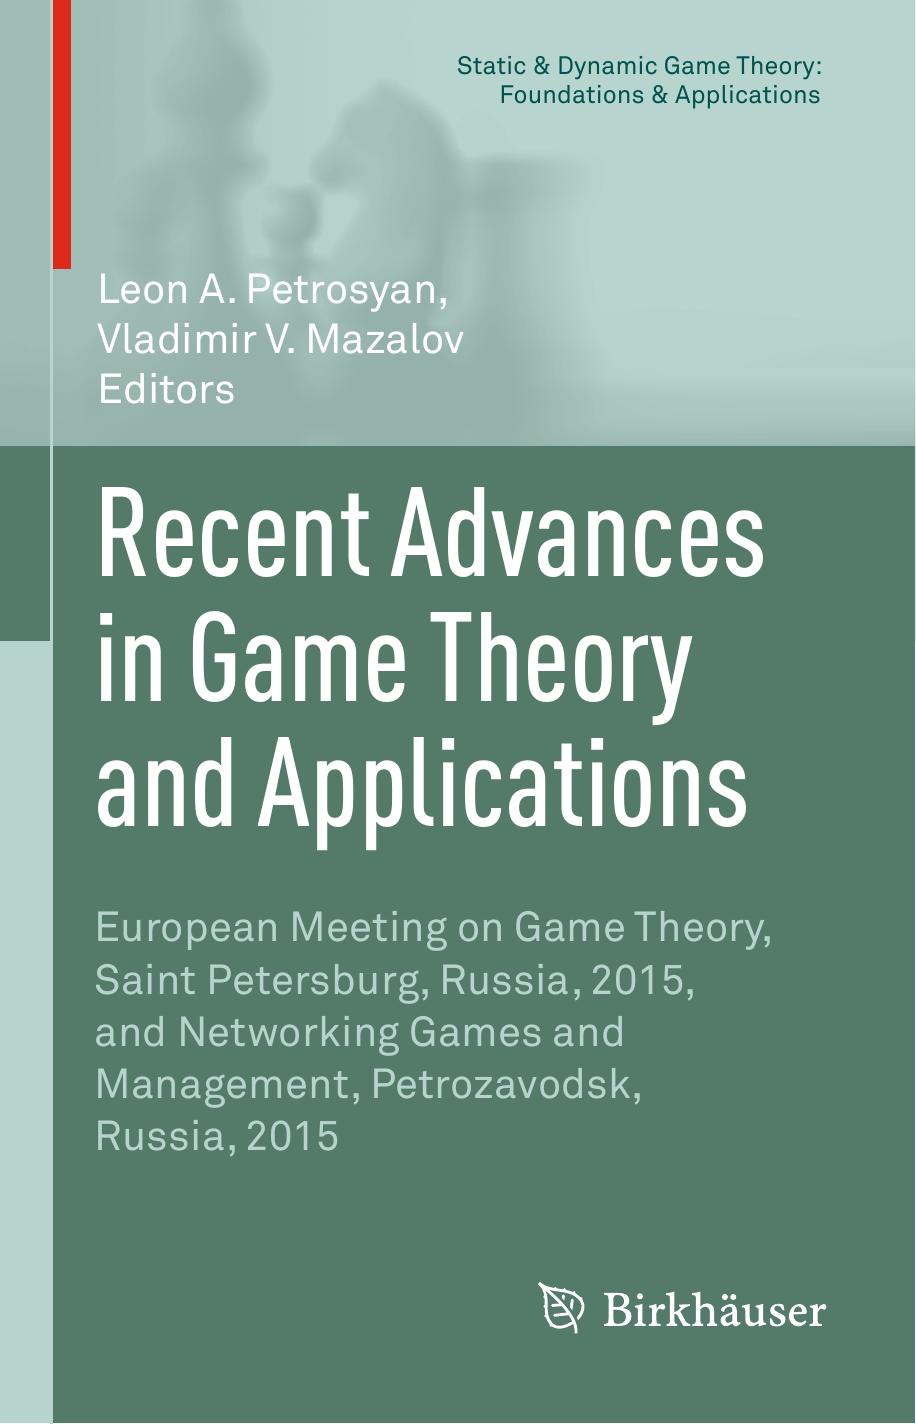 Recent Advances in Game Theory and Applications  European Meeting on Game Theory, Saint Petersburg, Russia, 2015, 2016